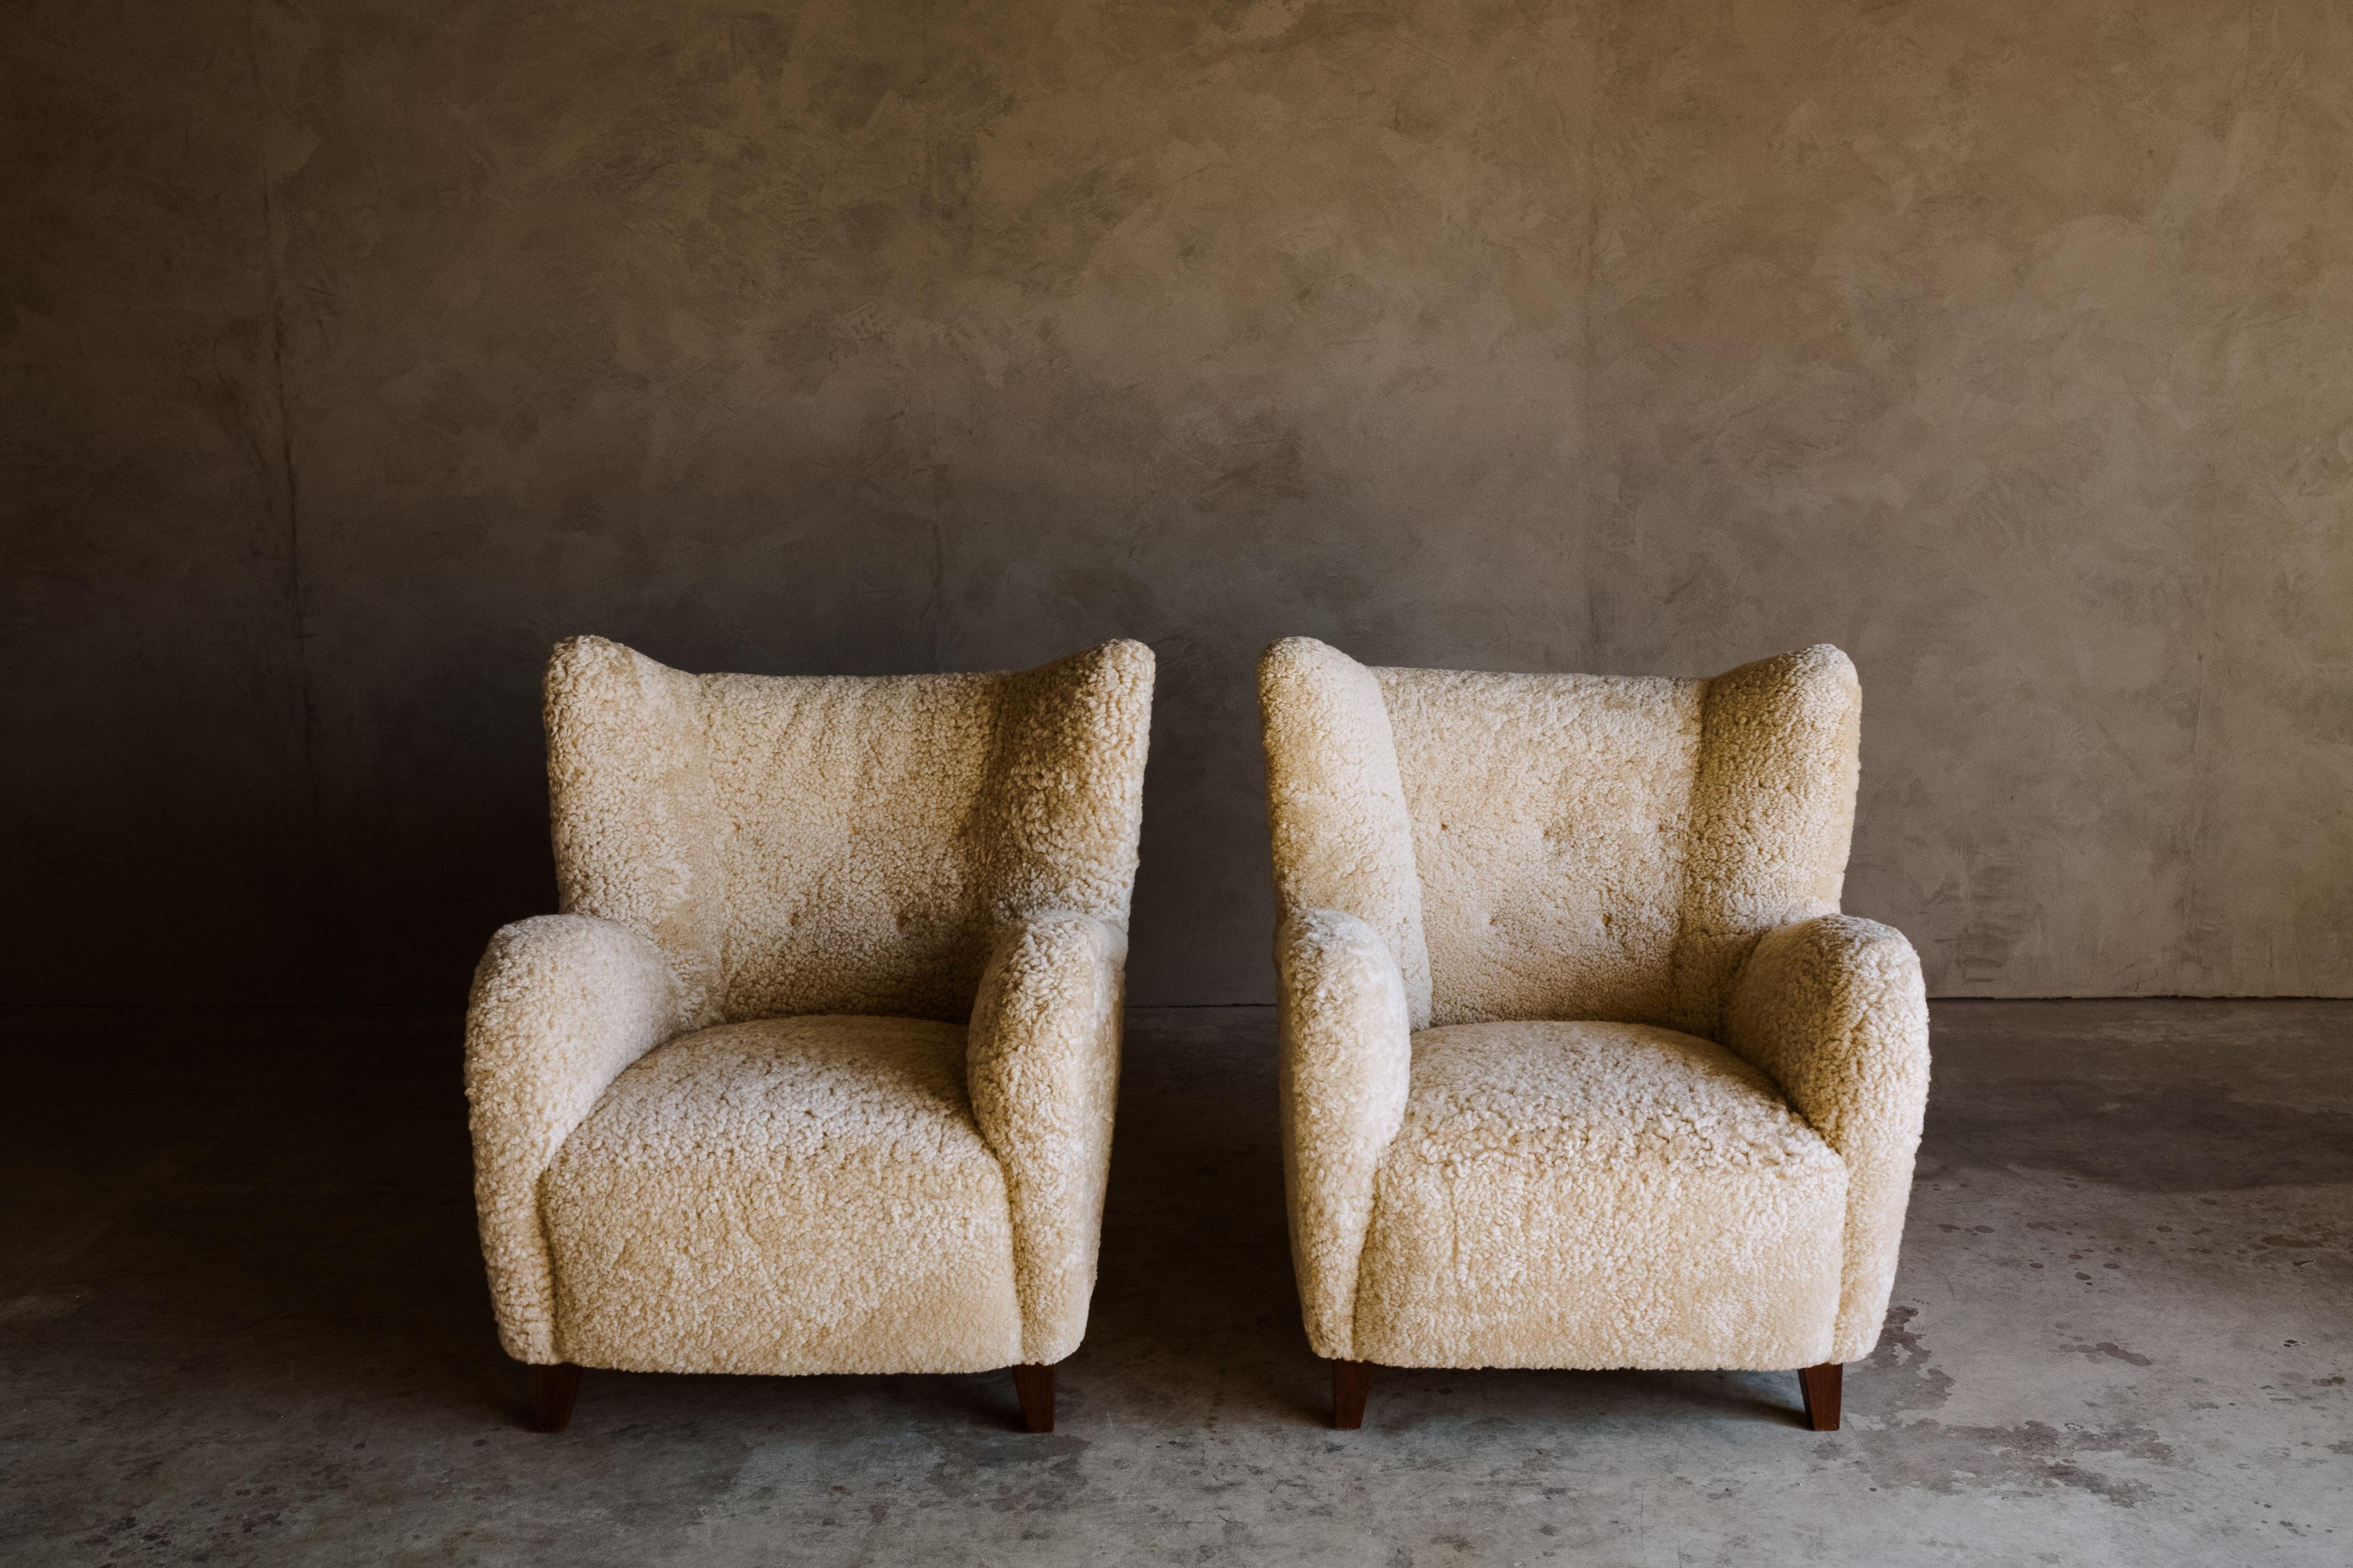 Vintage pair of sheepskin lounge chairs from Finland, circa 1950. Cabinetmaker designed with very soft light sheepskin upholstery and leather buttons. Professionally reupholstered in Denmark. Excellent condition.